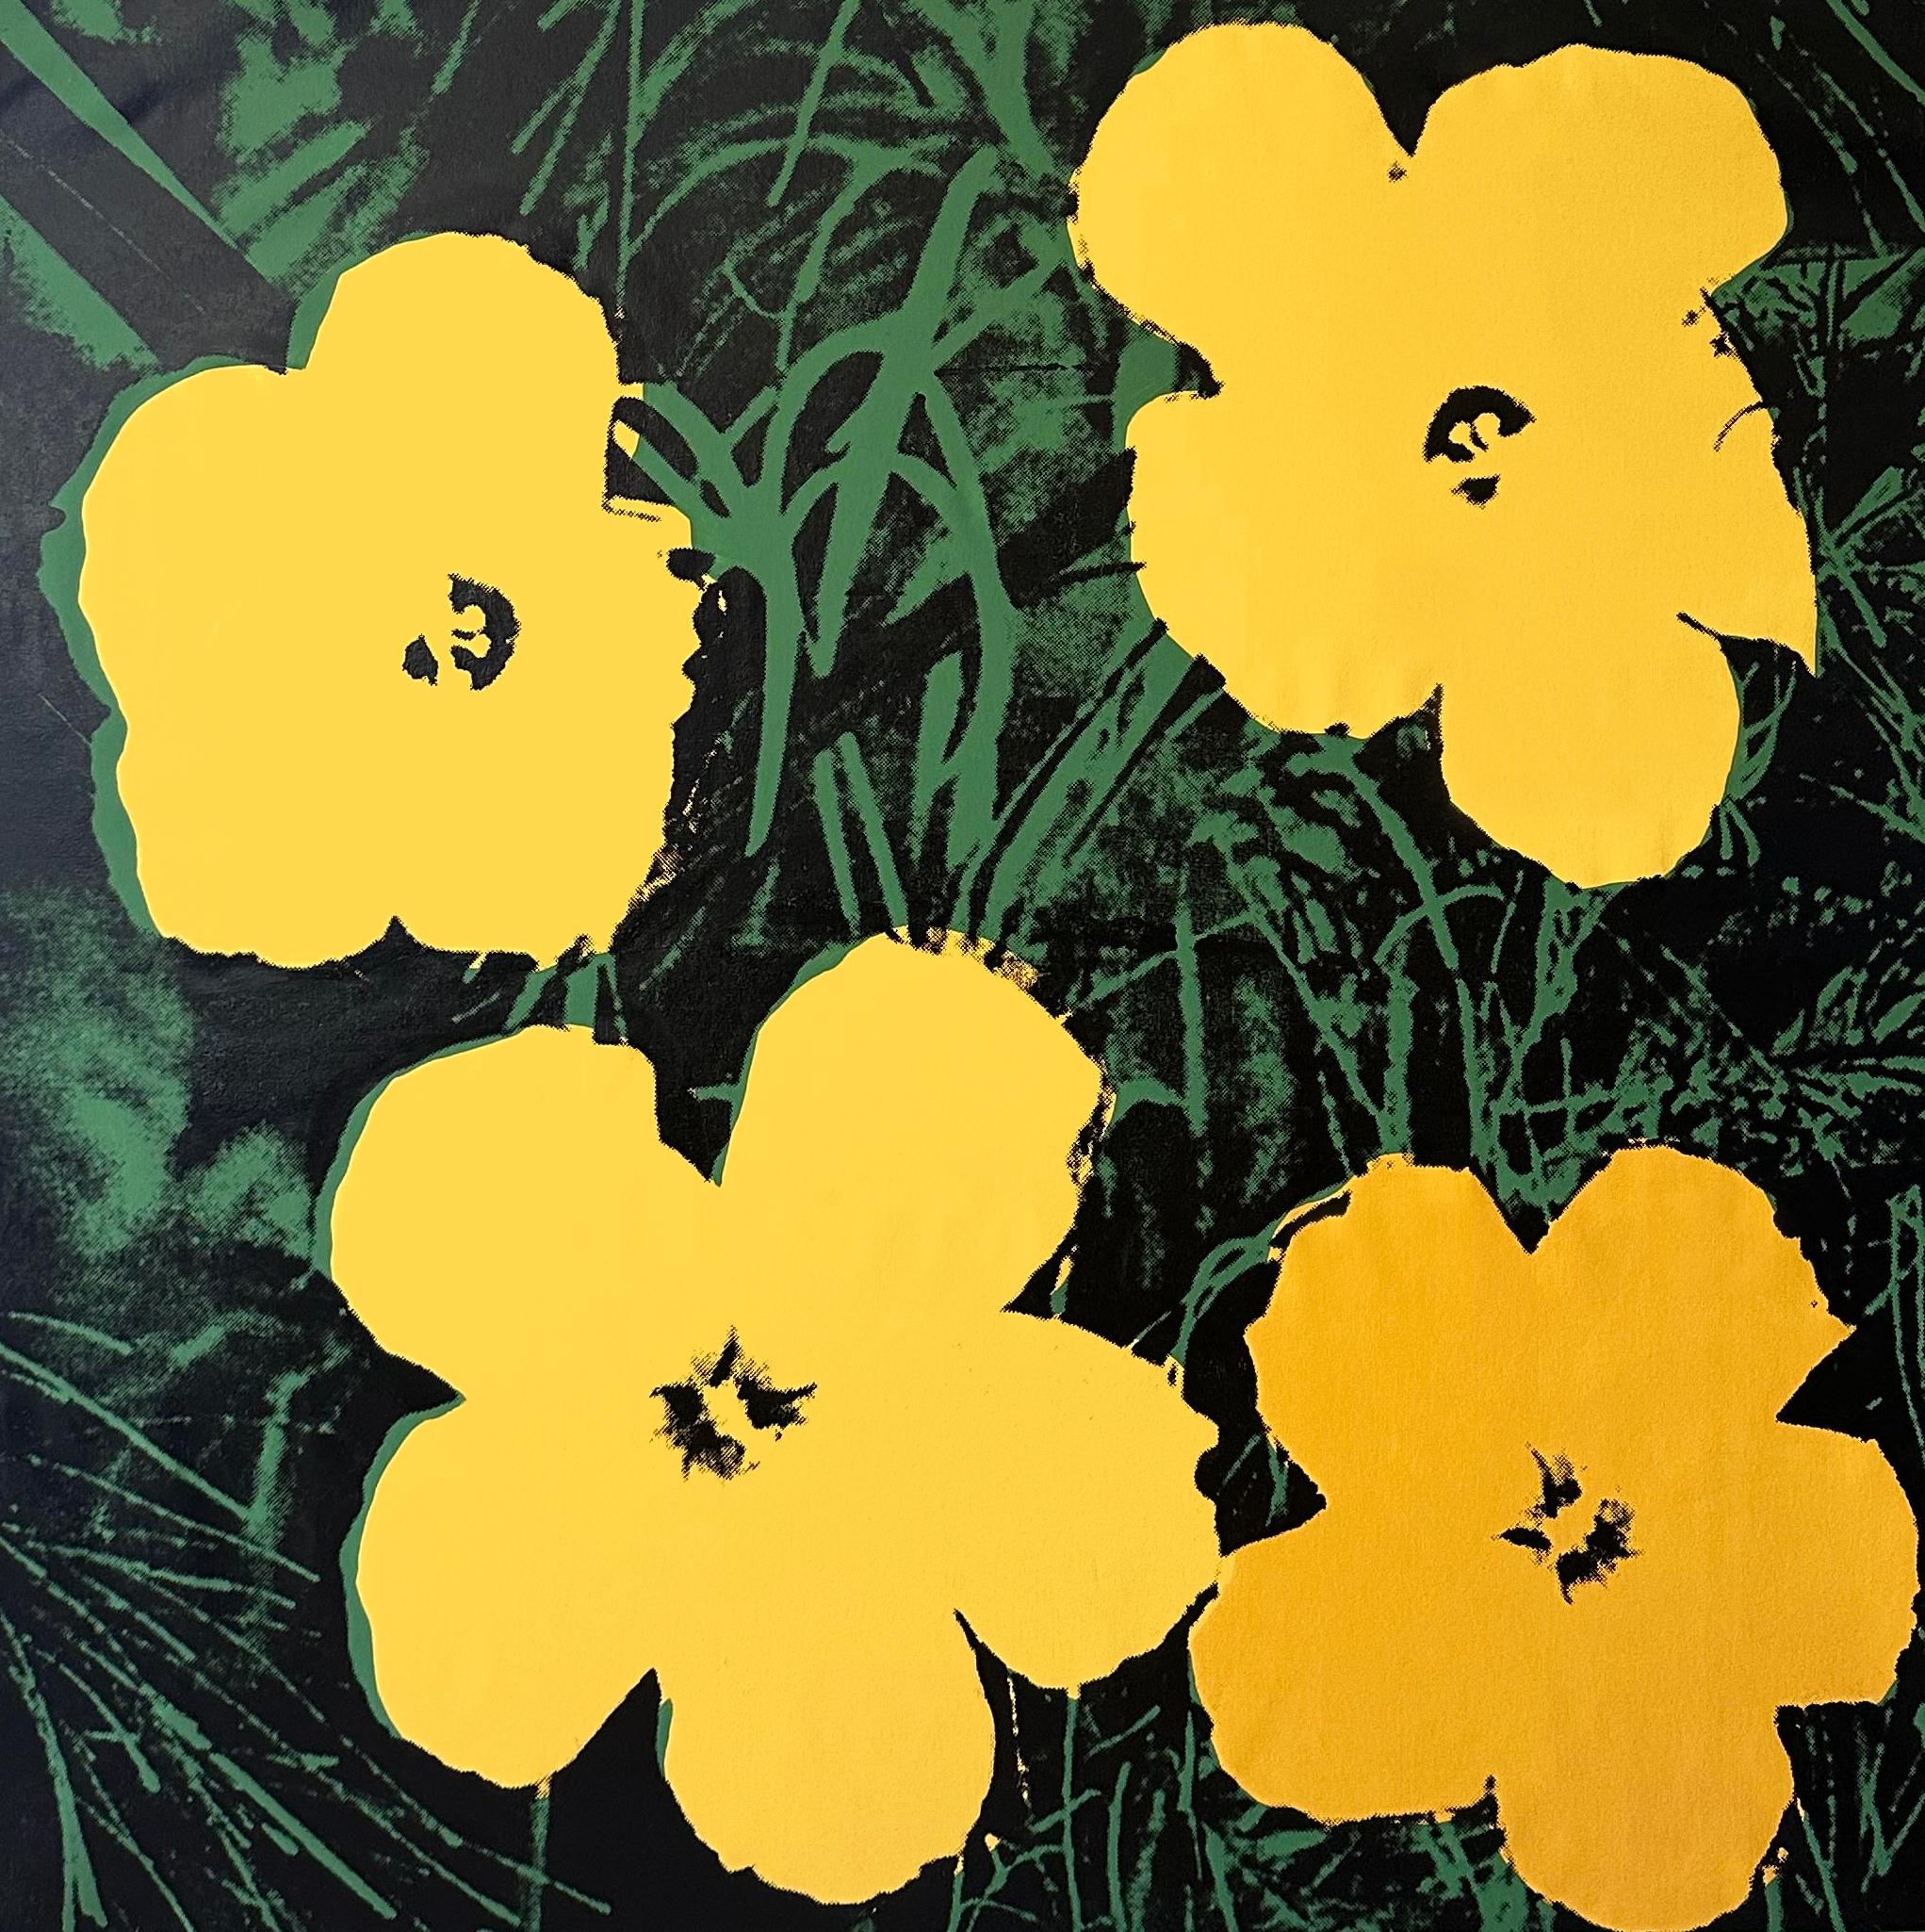 Denied Warhol Flowers, (Yellow) Silkscreen Painting by Charles Lutz
Silkscreen and acrylic on canvas with Denied stamp of the Andy Warhol Art Authentication Board.
48 x 48" inches
2008

Lutz's 2007 ''Warhol Denied'' series gained international